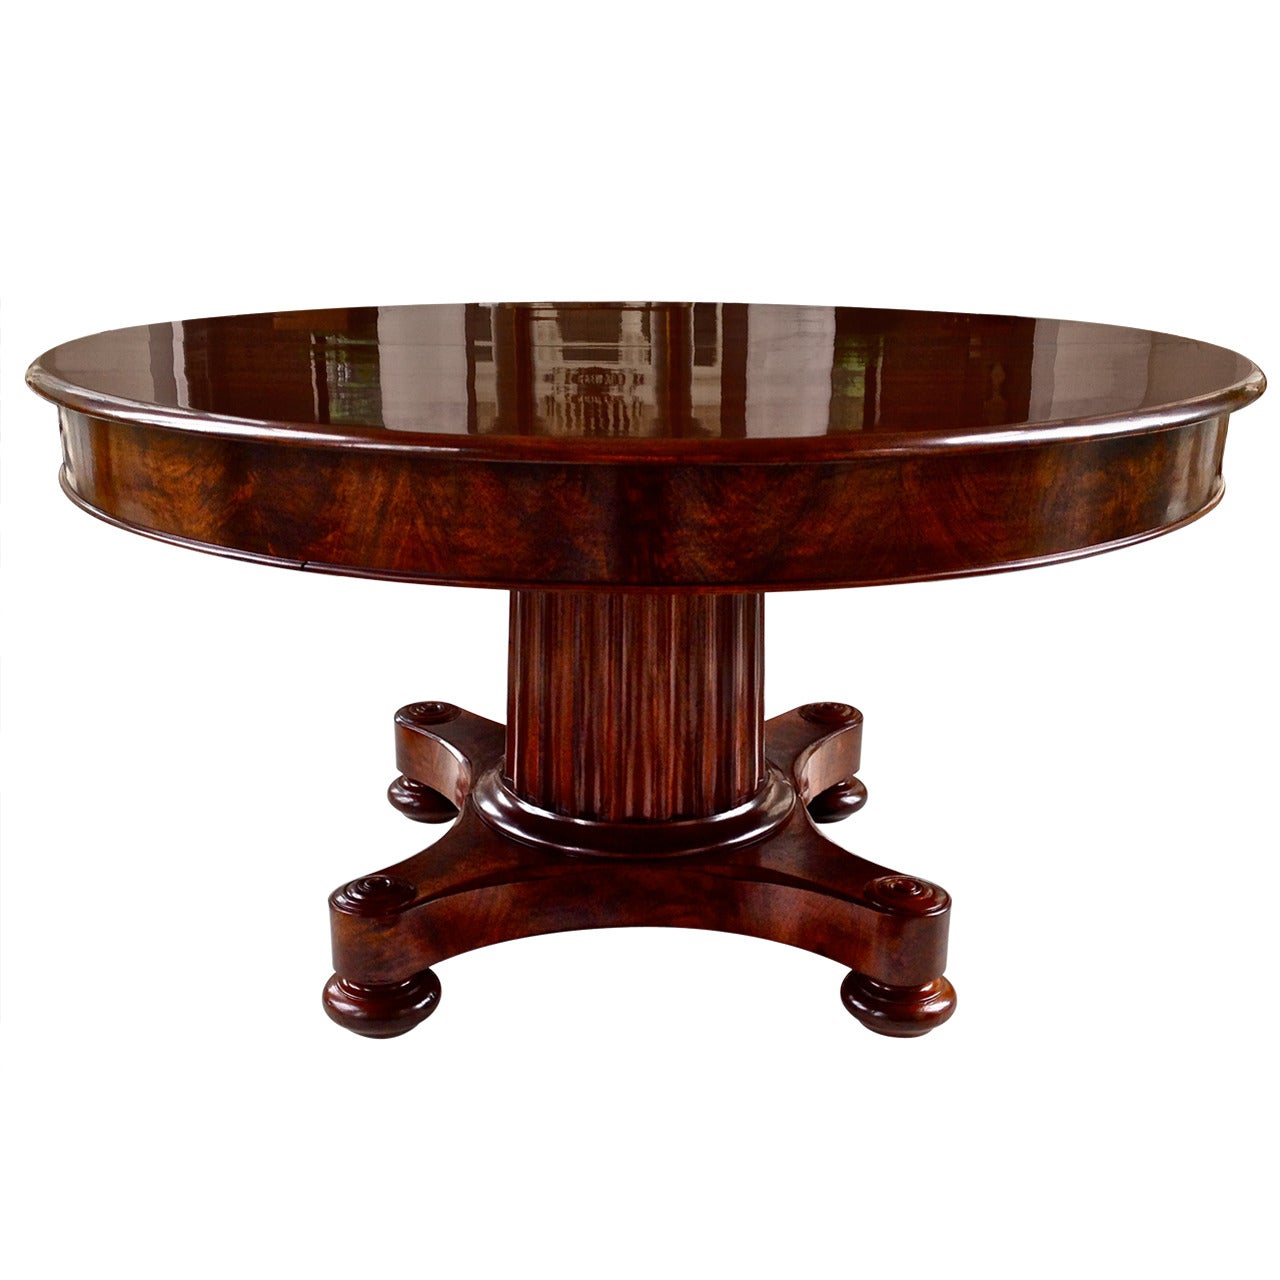 Period Boston Late Federal Mahogany Expandable Round Dining TableRound